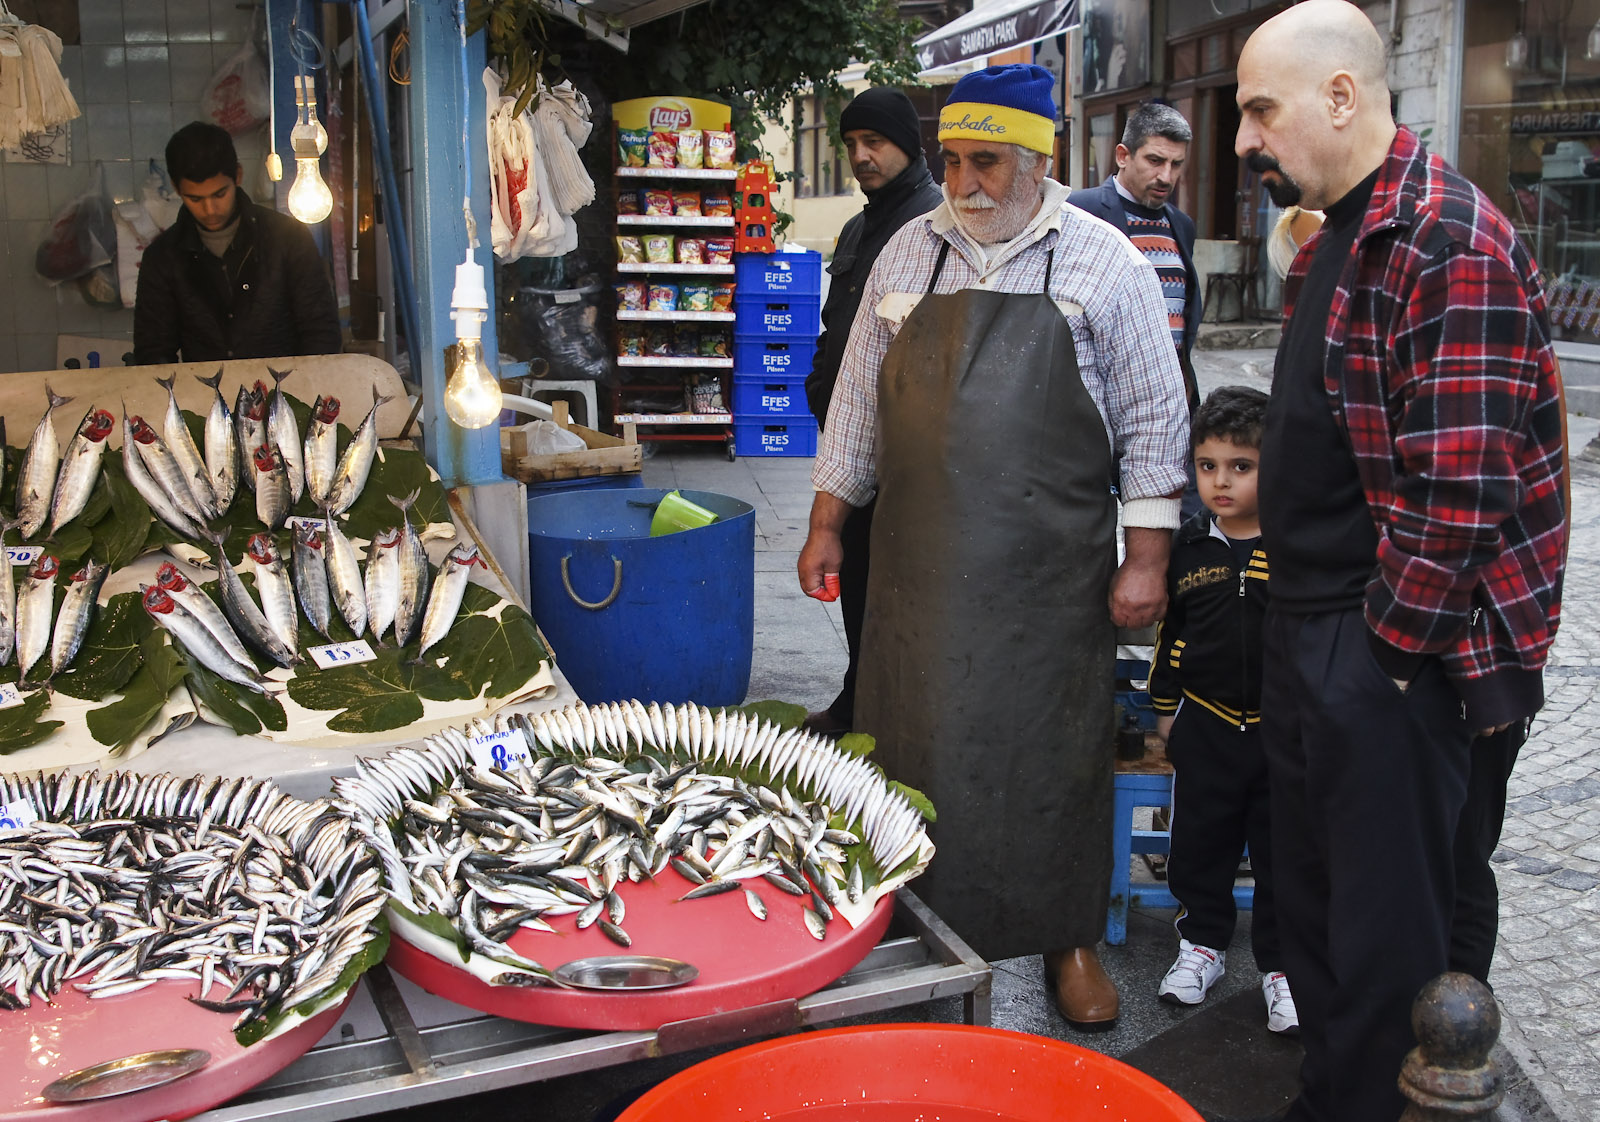 Locals Shopping for seafood at the Fish Market, Istanbul